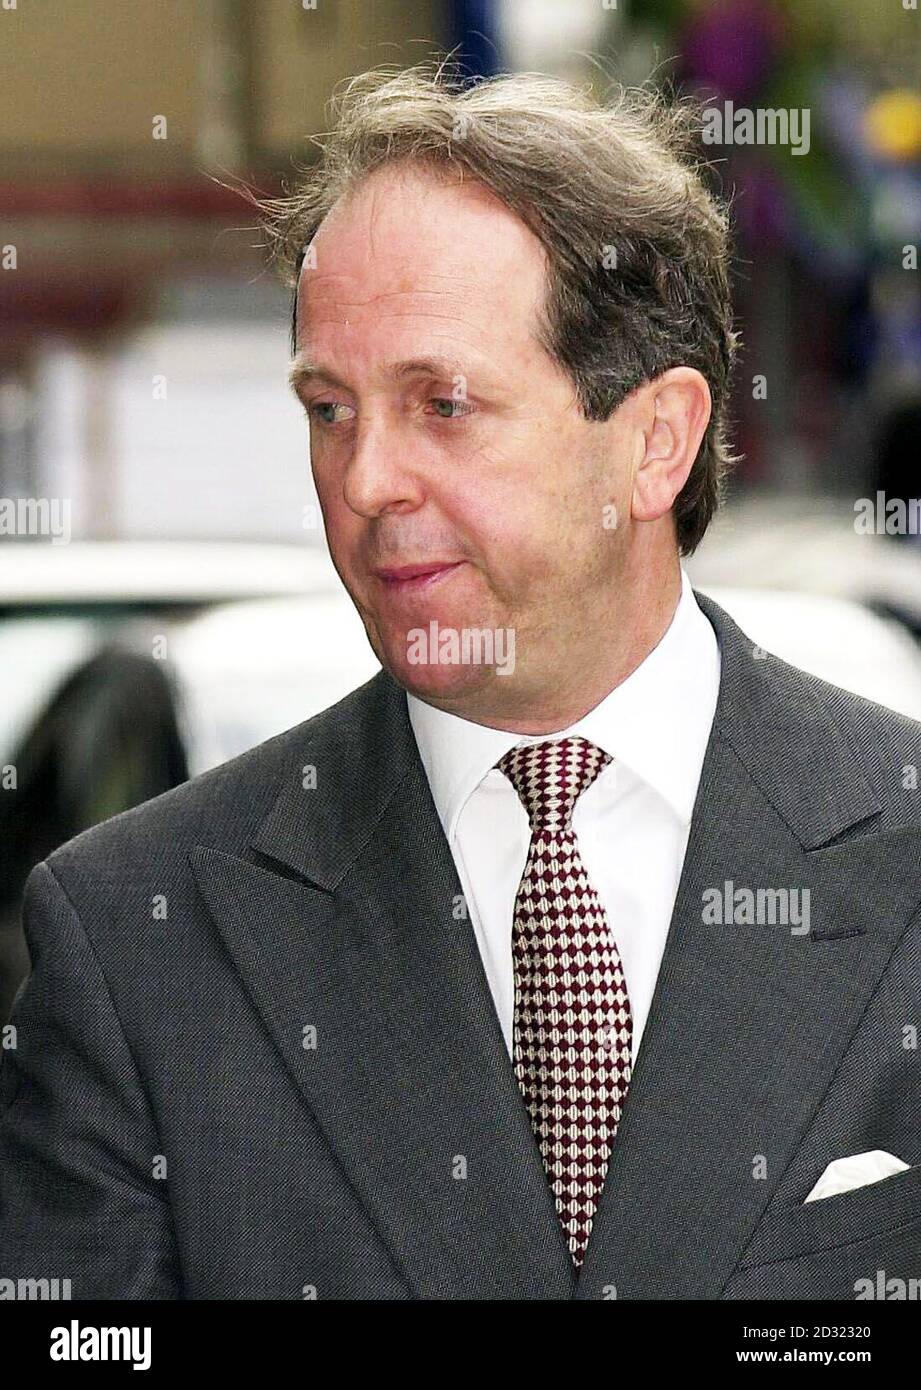 Former Royal butler, Harold Brown, who worked at Princess Diana's, Kensington Palace, arrives at Bow Street Magistrates Court. Brown is charged with the alleged theft of valuables from the estate of the Princess of Wales. 02/12/02 : Harold Brown, the former royal butler accused of stealing from the estate of Diana, Princess of Wales, who is due to go on trial, at the Old Bailey in London. Mr Brown, 50, from Tunbridge Wells, Kent, is accused of stealing valuables worth more than 500,000 from Diana's estate. Brown faces three charges under the 1968 Theft Act. Stock Photo